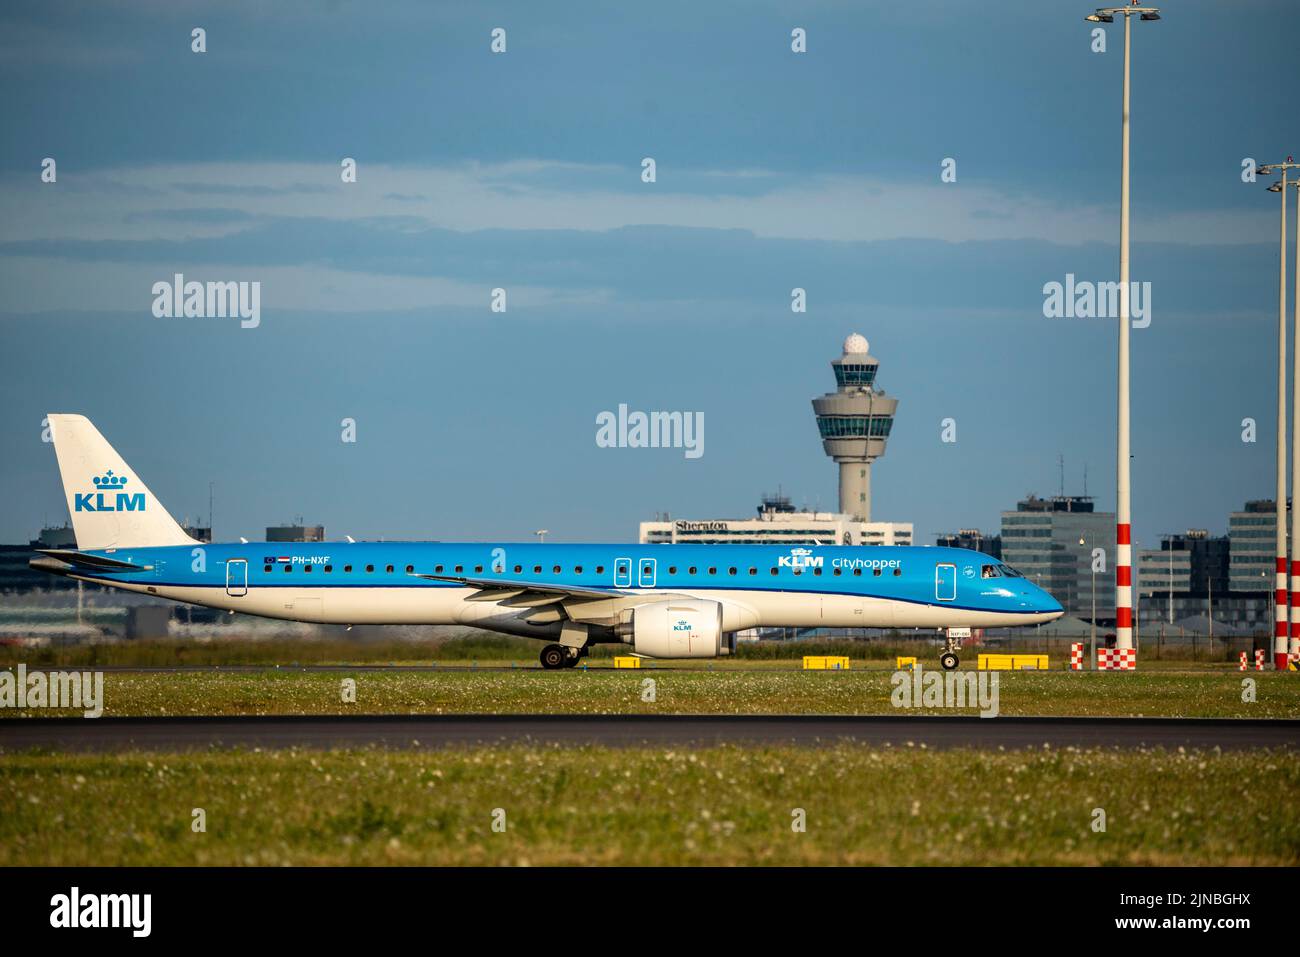 Amsterdam Shiphol Airport, Polderbaan, one of 6 runways, tower air traffic control, on taxiway for take-off, PH-NXF, KLM Cityhopper Embraer E195-E2 Stock Photo